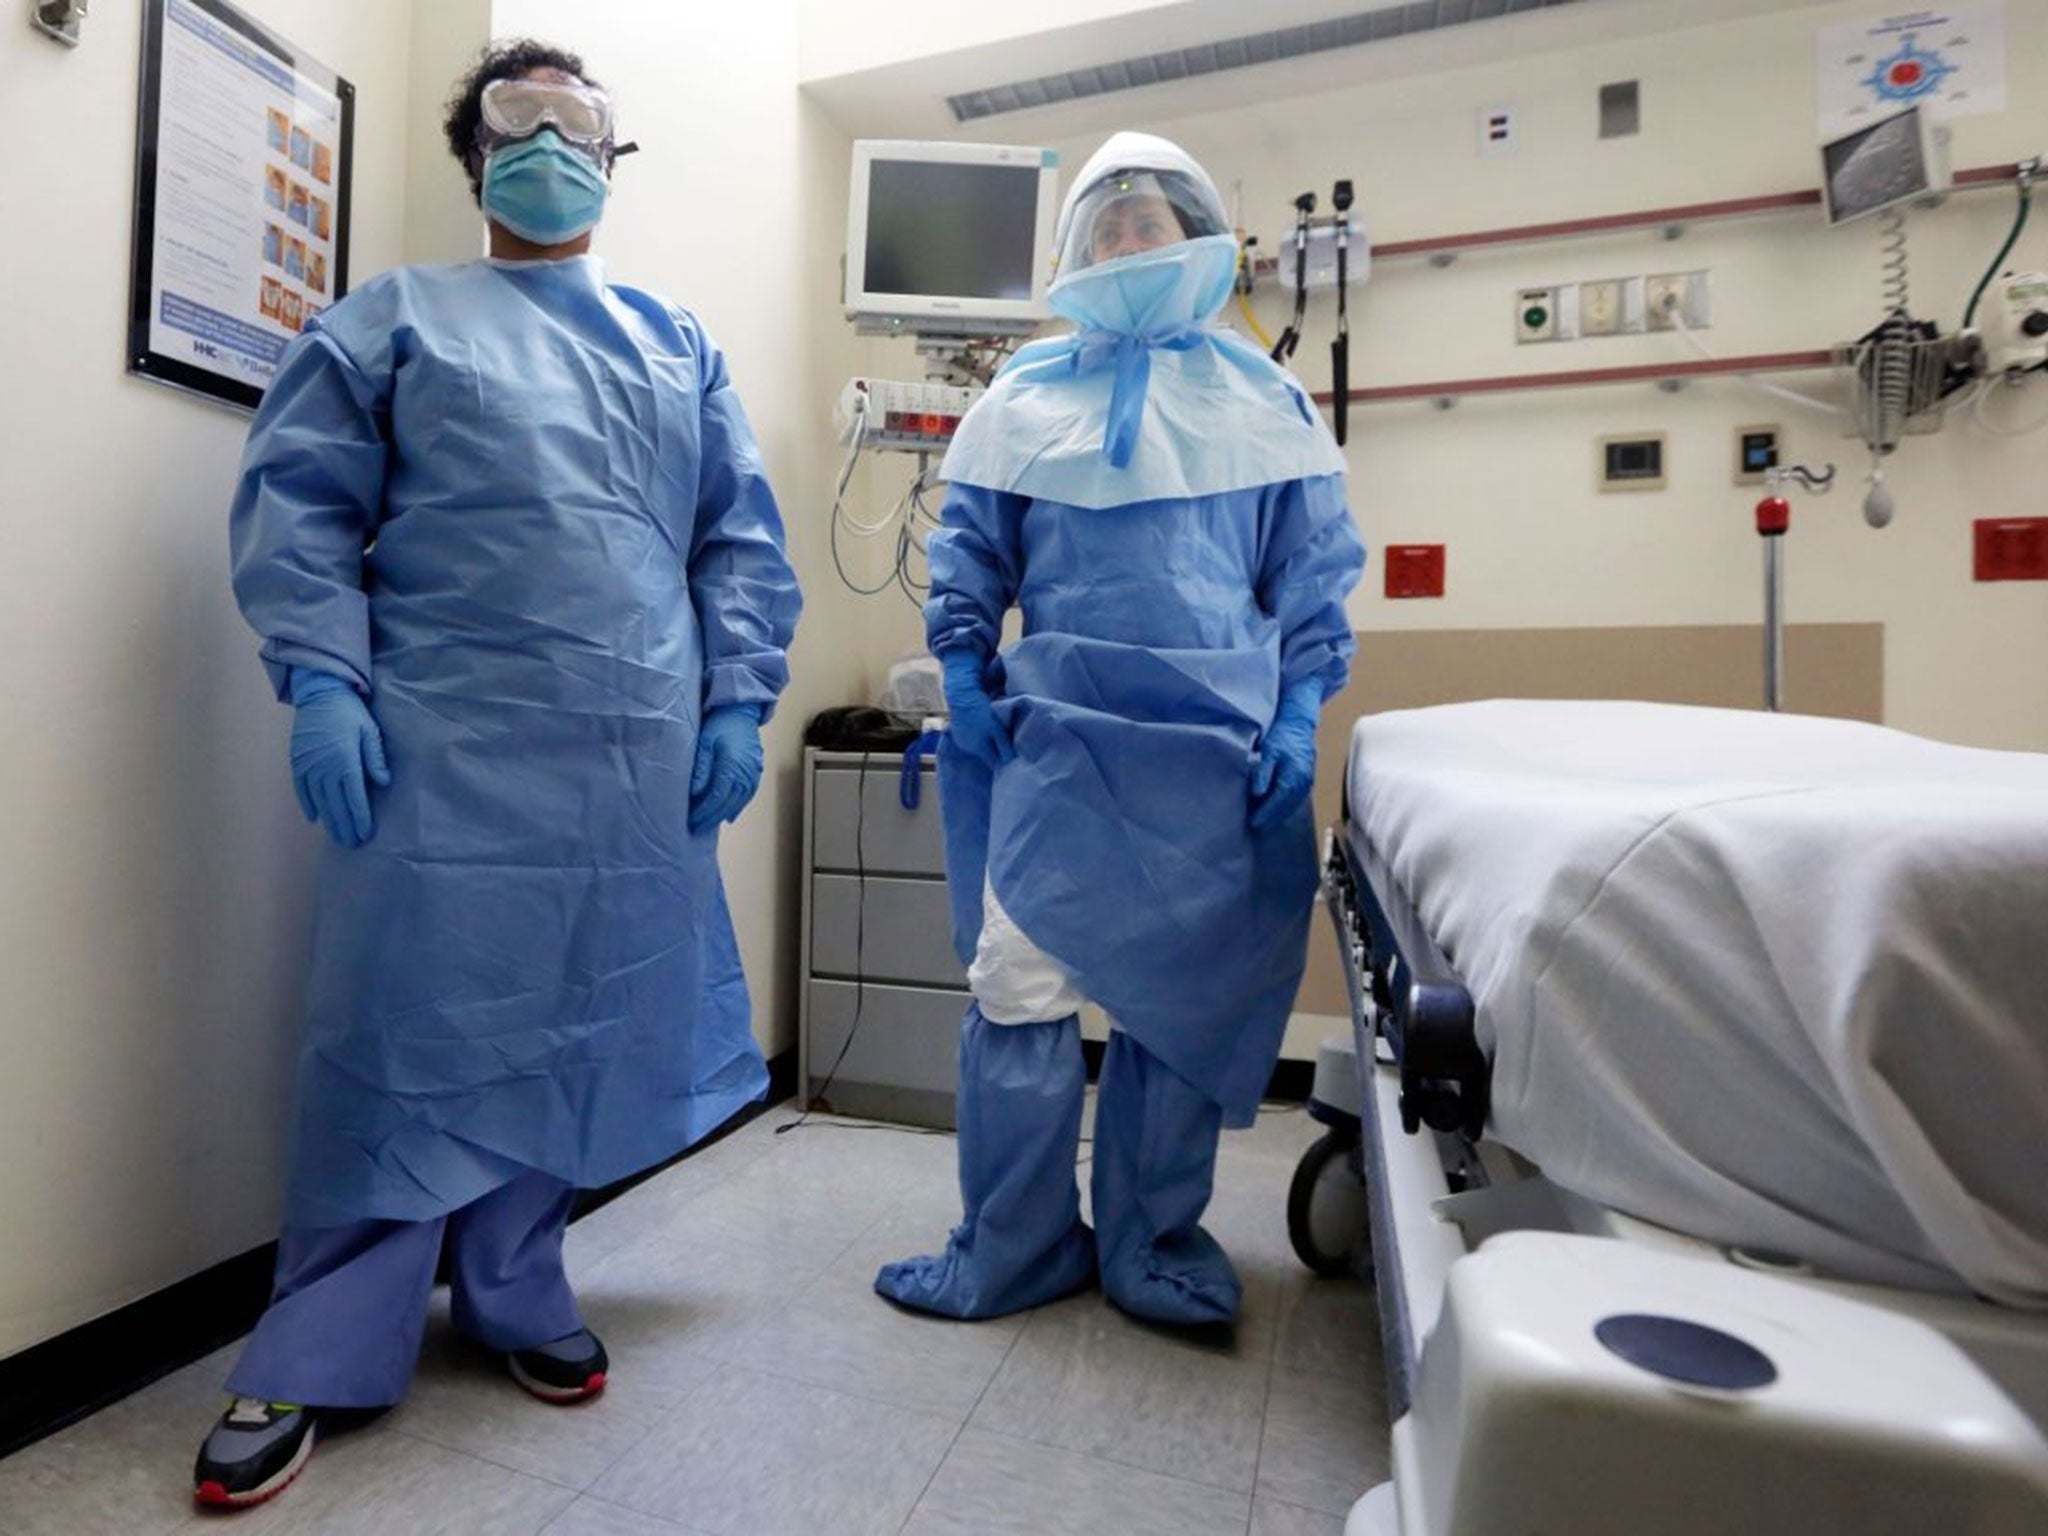 Ebola doctors wearing protective clothing in an emergency room.